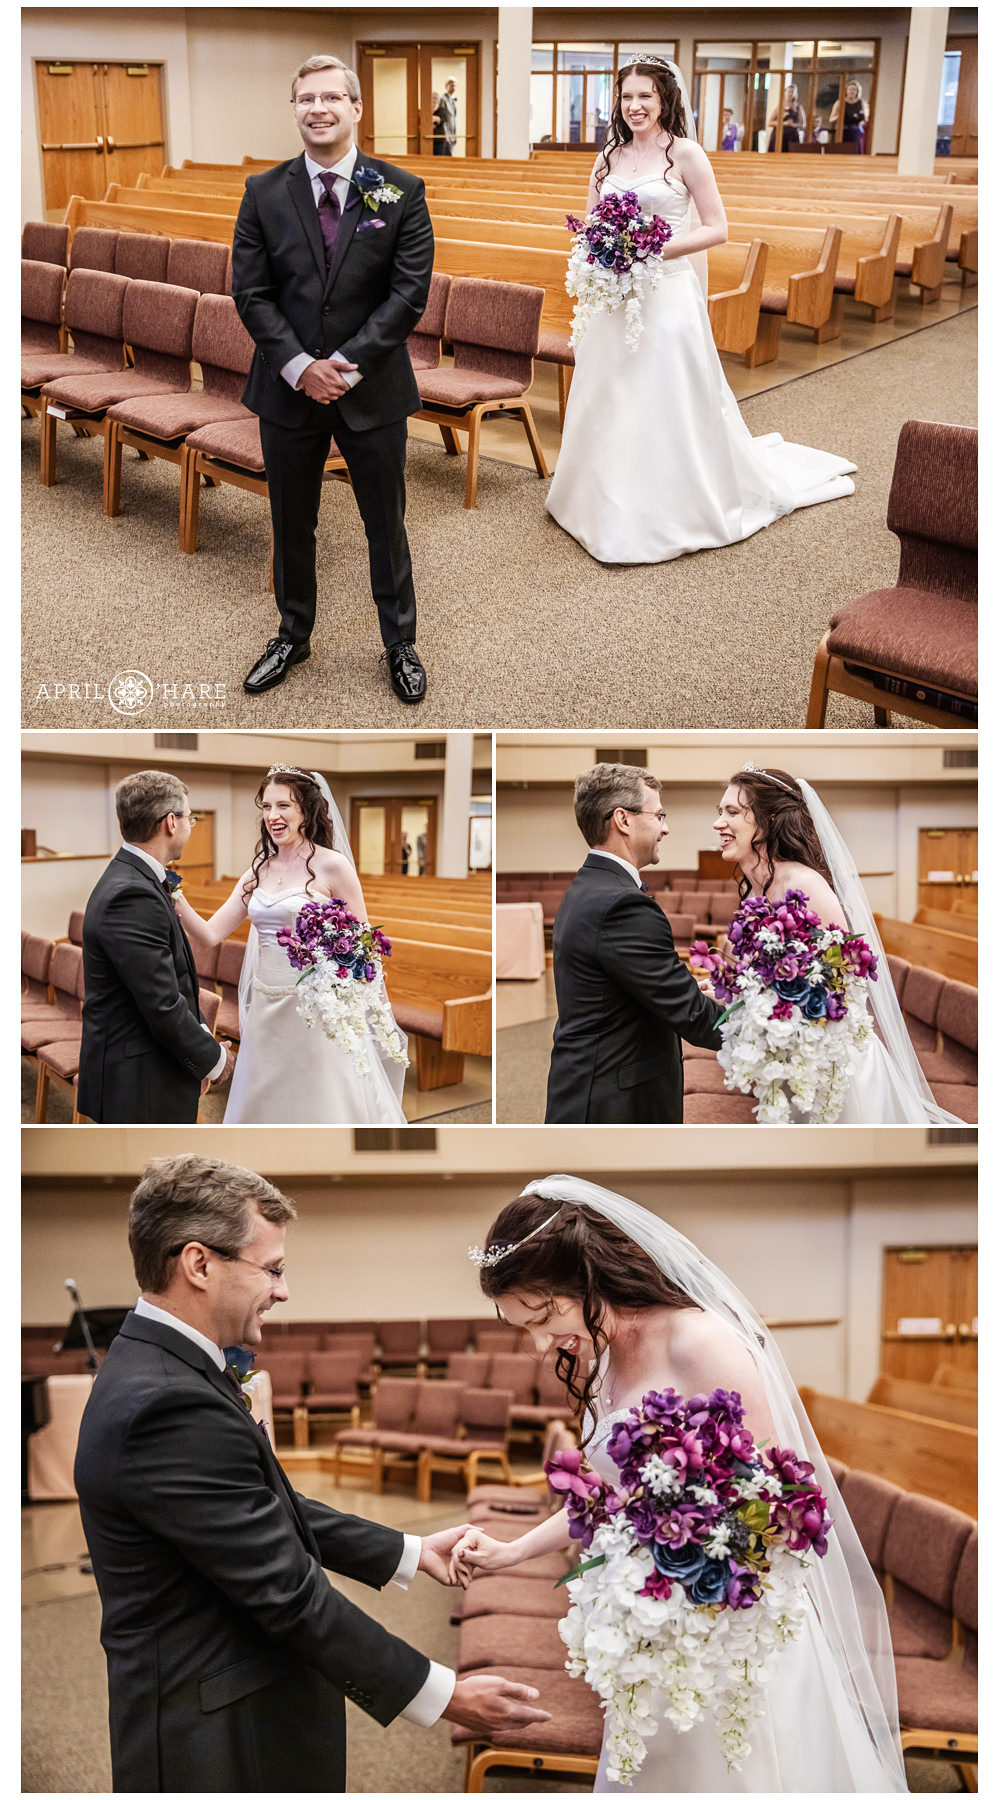 First Look between groom and his bride prior to their wedding ceremony at Our Father Lutheran Church in Centennial Colorado